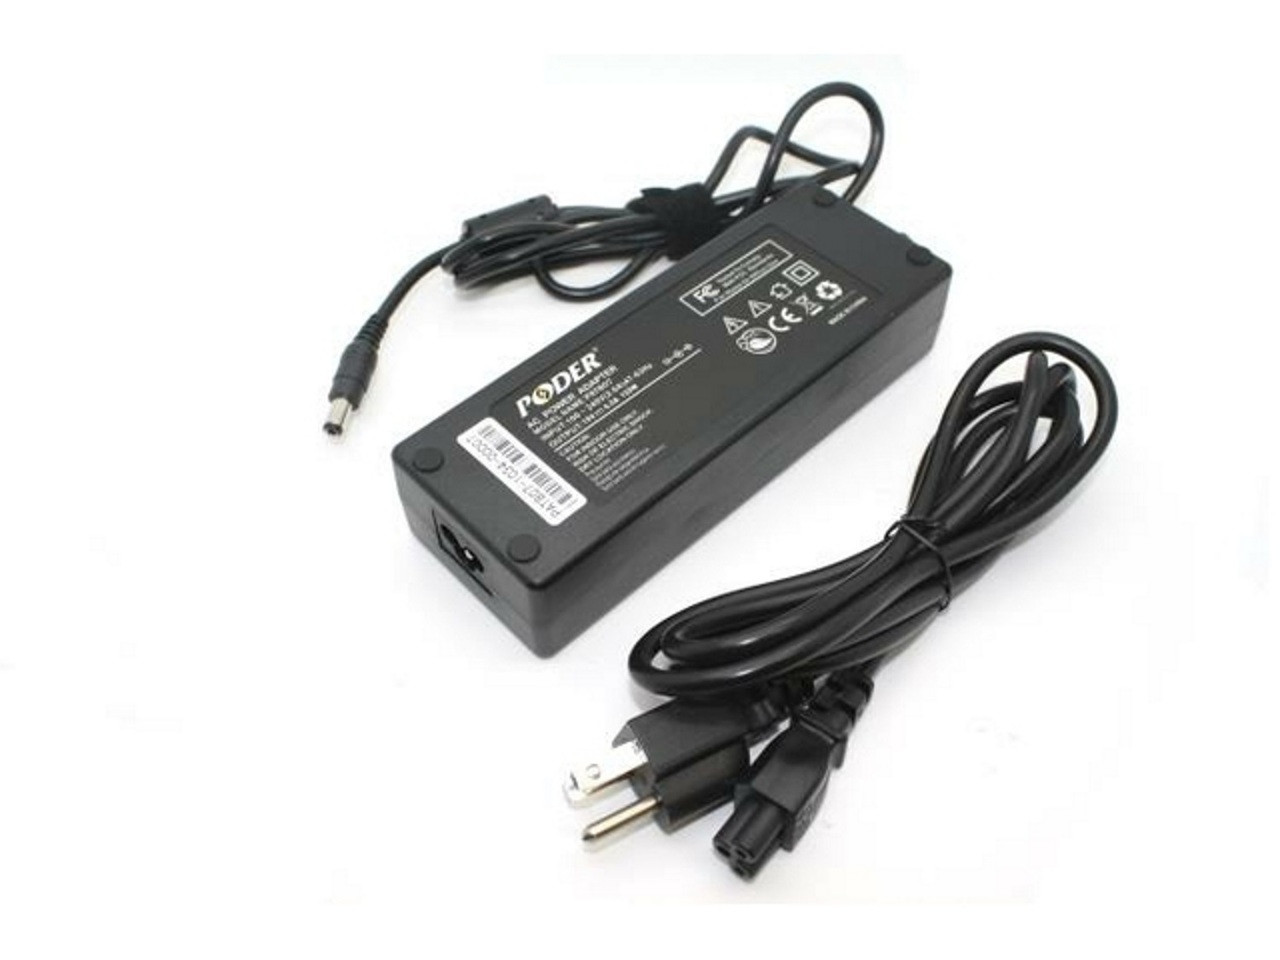 Poder® 120W AC Adapter for Toshiba Satellite P10, P15, P25, A25, A35 Series